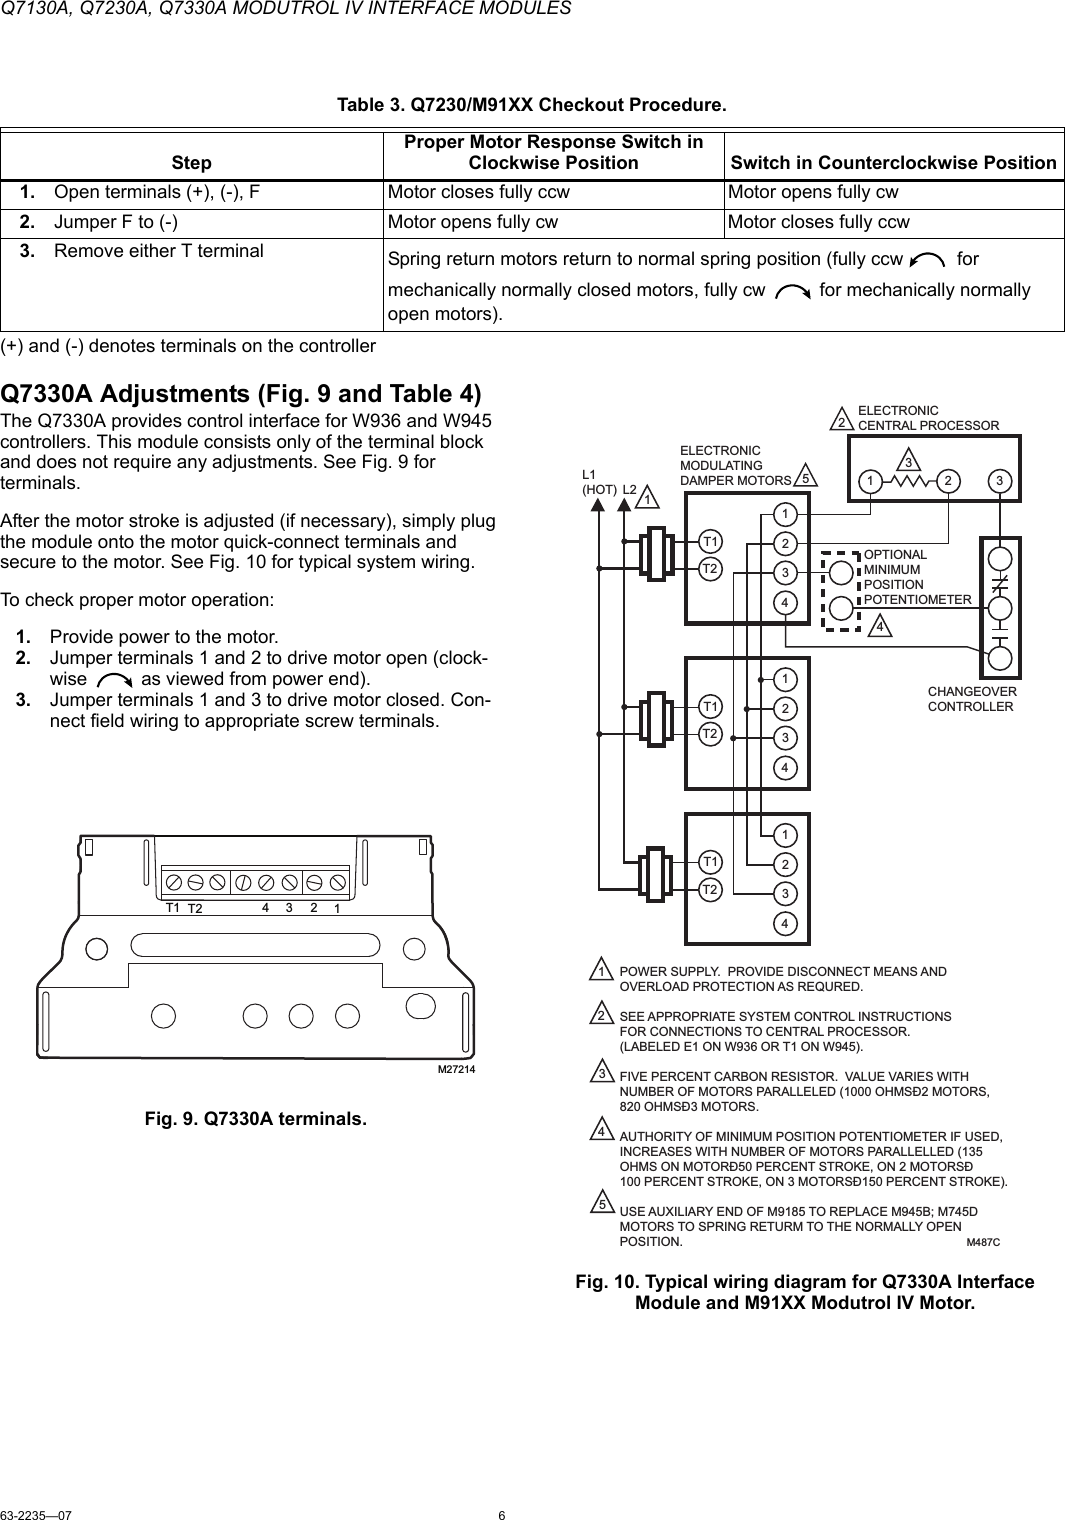 Page 6 of 8 - 63-2235_D Q7130A, Q7230A, Q7330AModutrol IV Interface Modules  Installation Directions